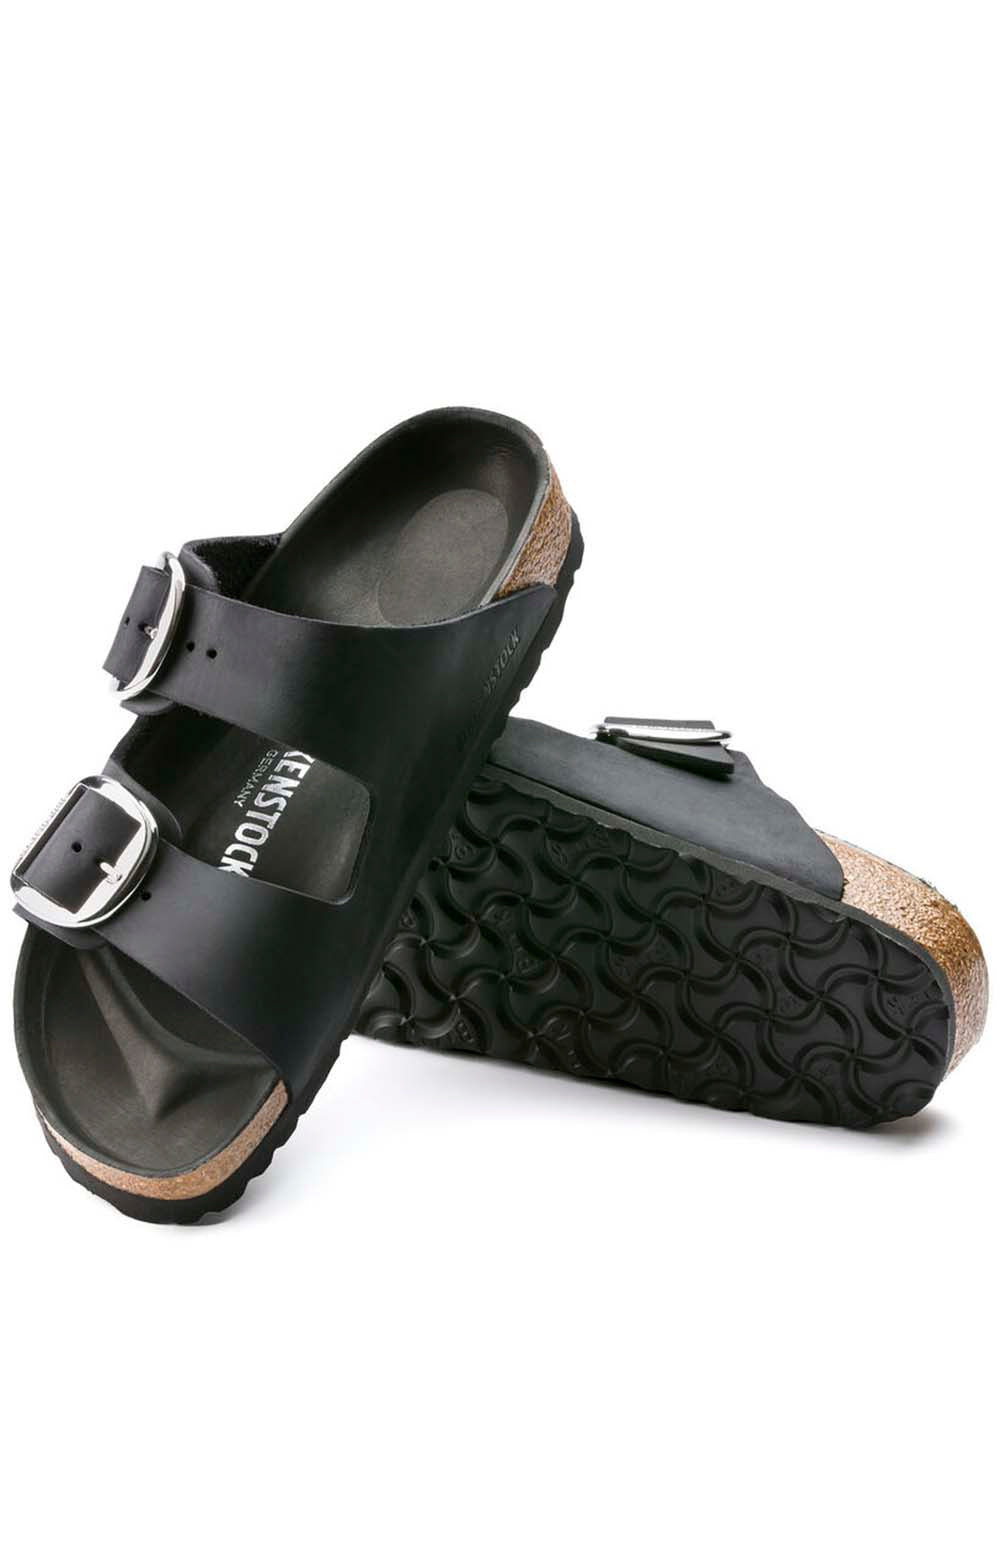 Classic Birkenstock Arizona Big Buckle Sandals featuring a soft suede lining and EVA sole